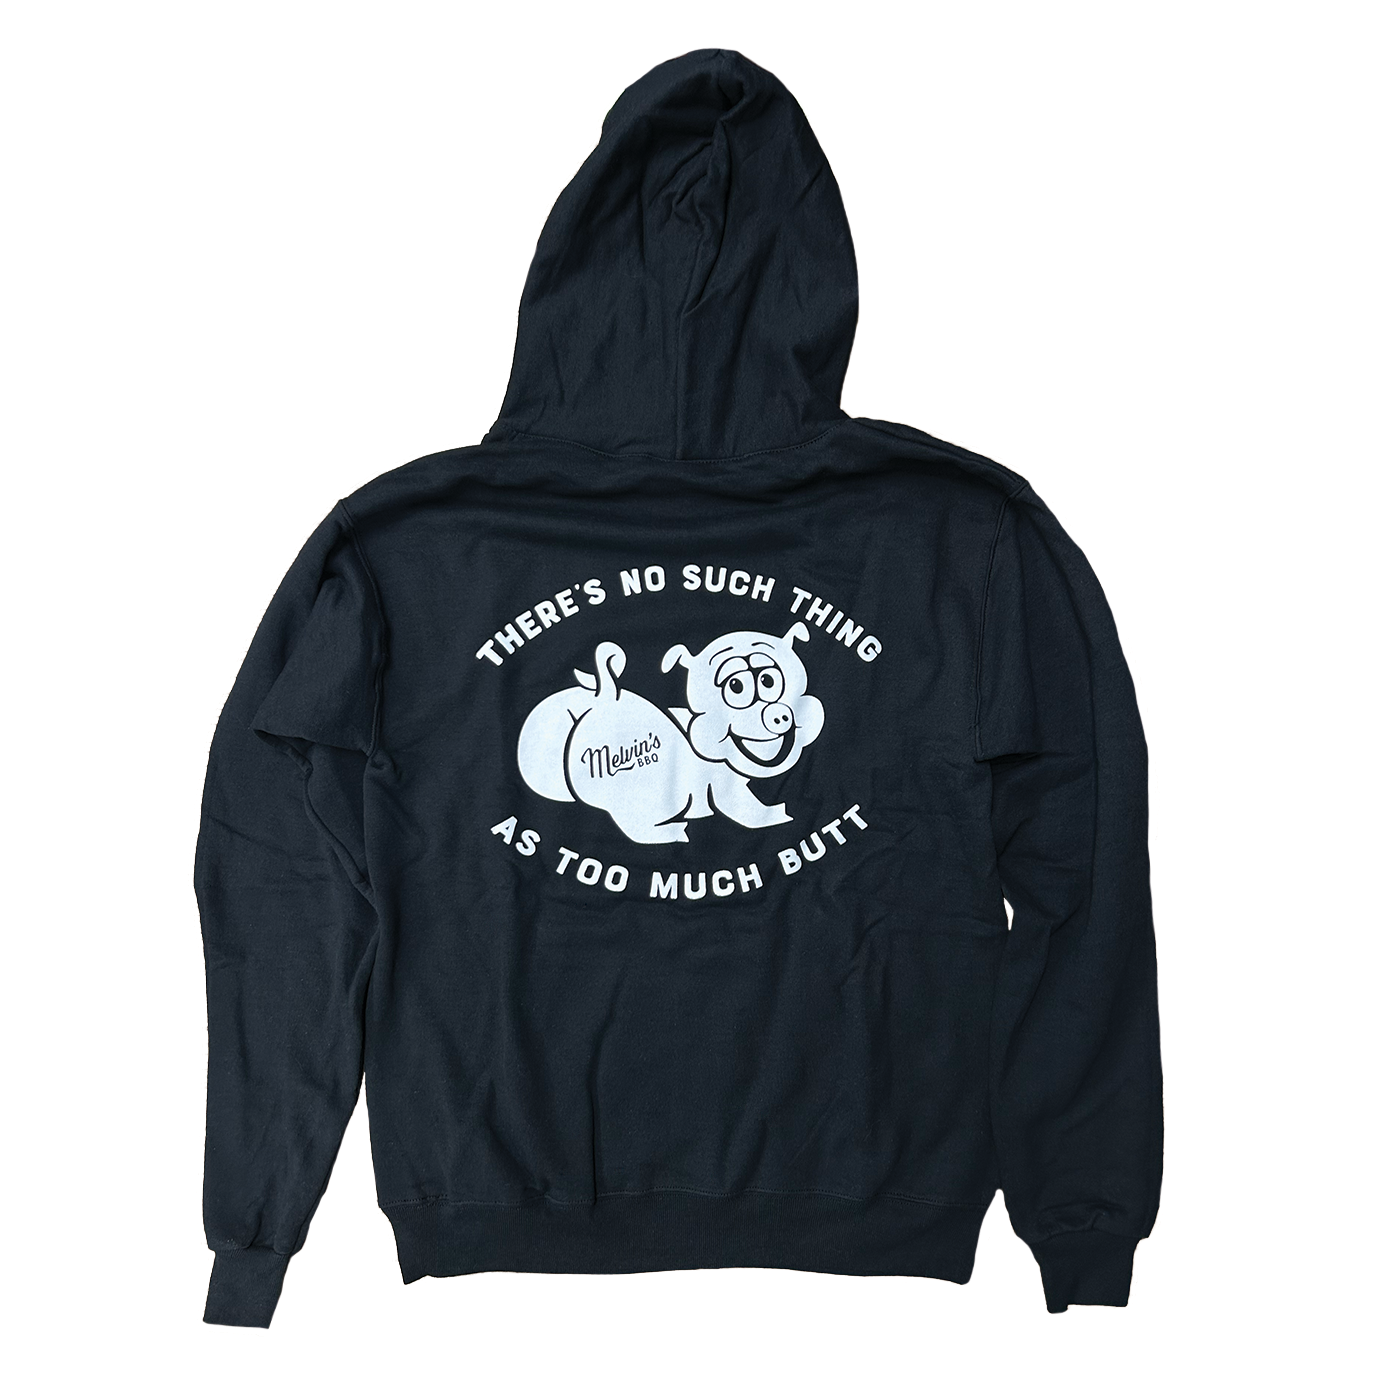 Melvin's BBQ Black Too Much Butt Hoodie